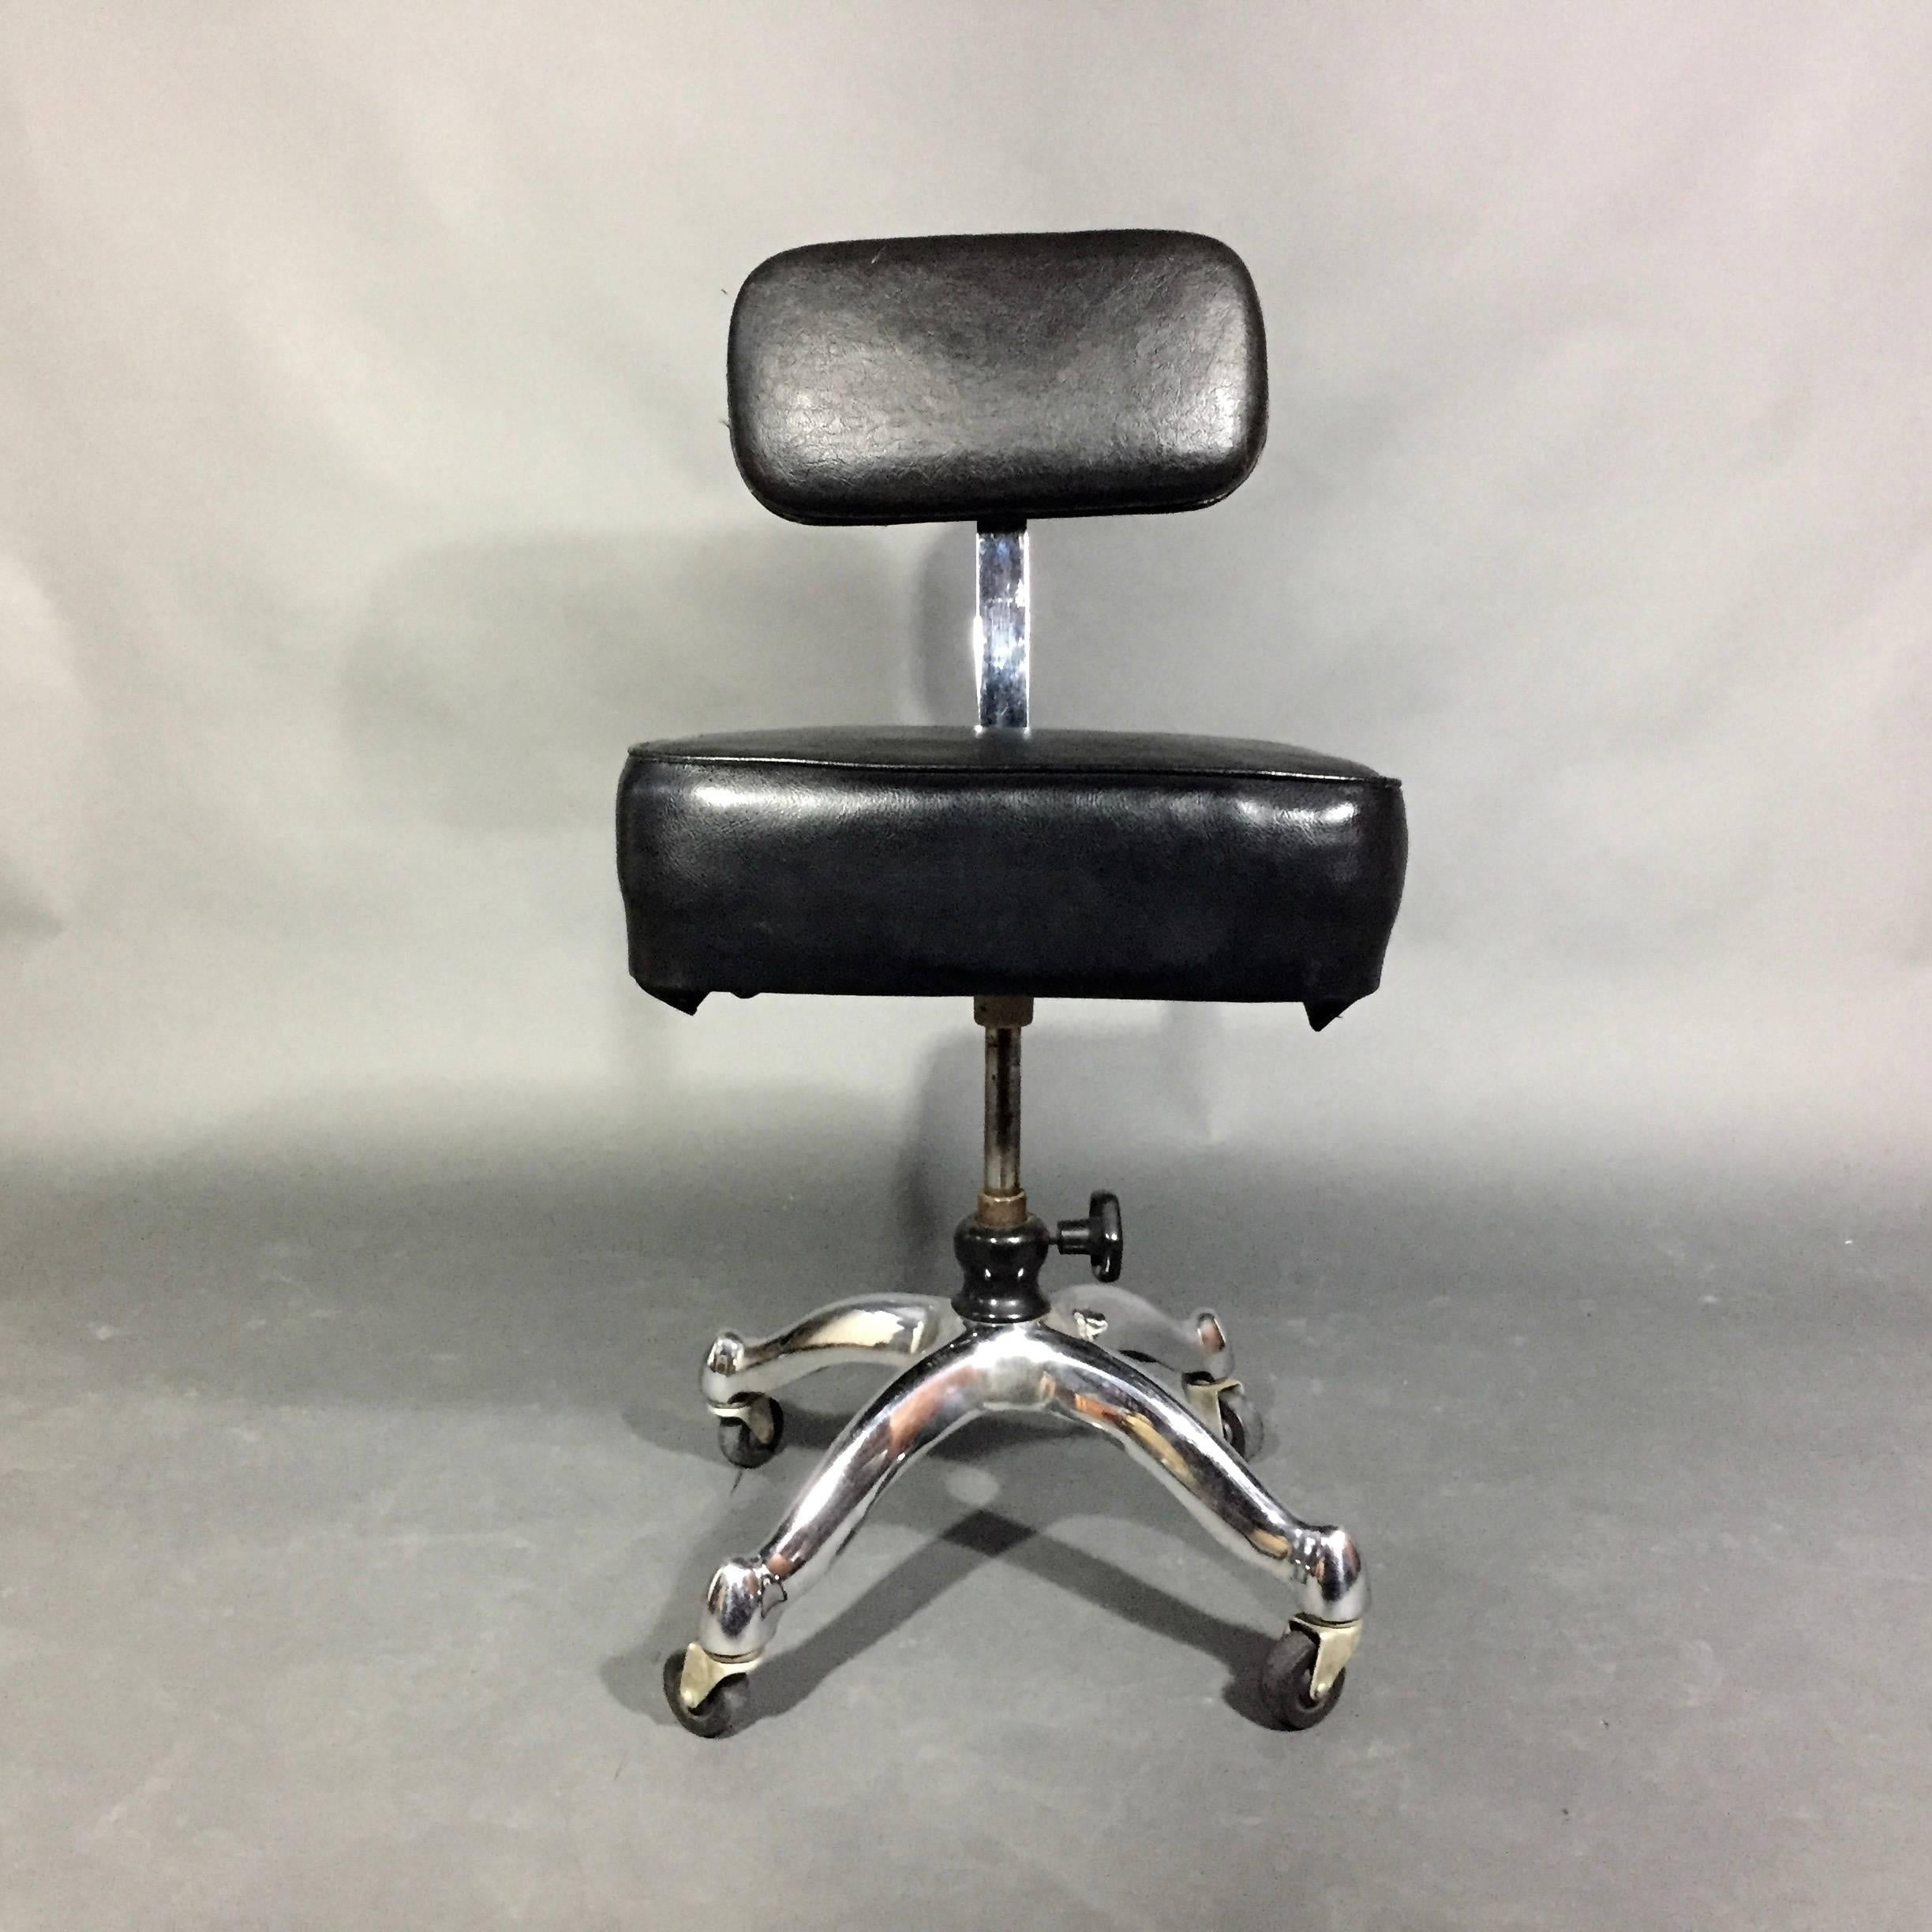 Ohio based F & F Koenigkrame is known more for their incredible barber chairs from 1920s-1940s that remain highly in-demand today than for their well-constructed medical equipment for which the company thrived. This desk chair from the 1930s is